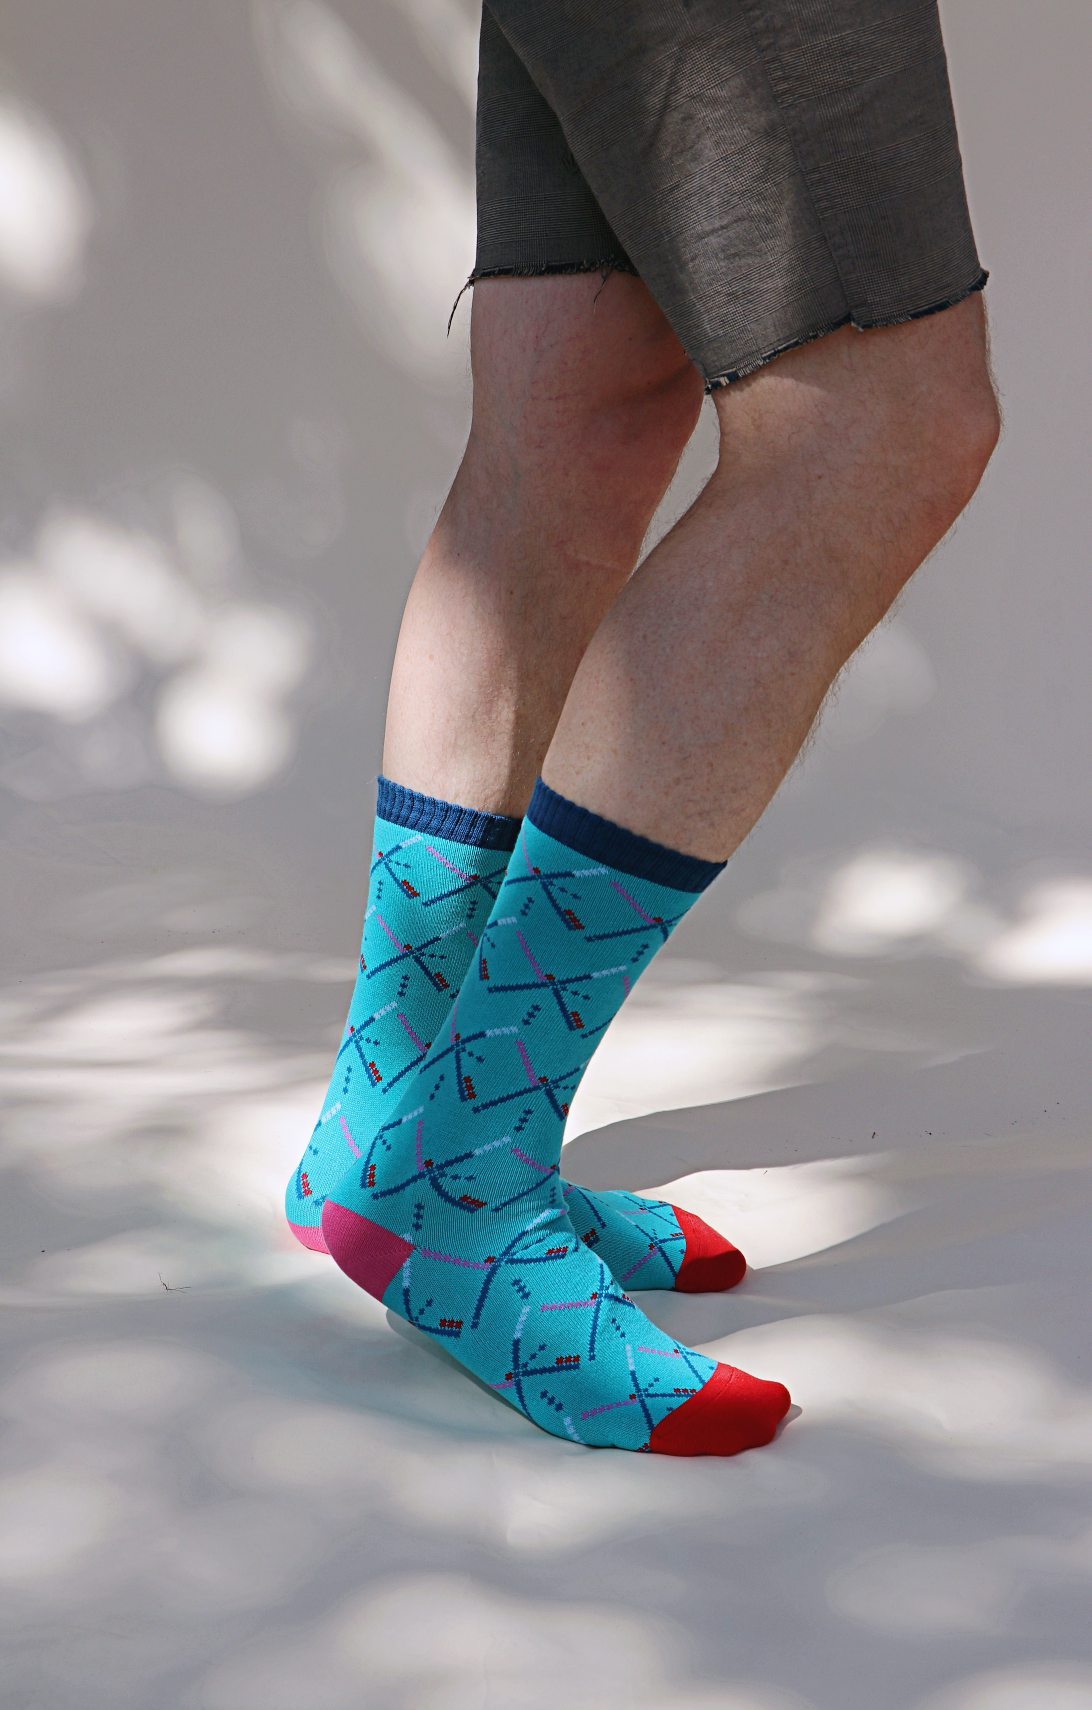 Light blue of TABBISOCKS brand Replant Pairs PDX Carpet Socks, male leg wearing half pants wearing socks with PDX Carpet design all over, red toe and dark blue footwear, pink point color at heel